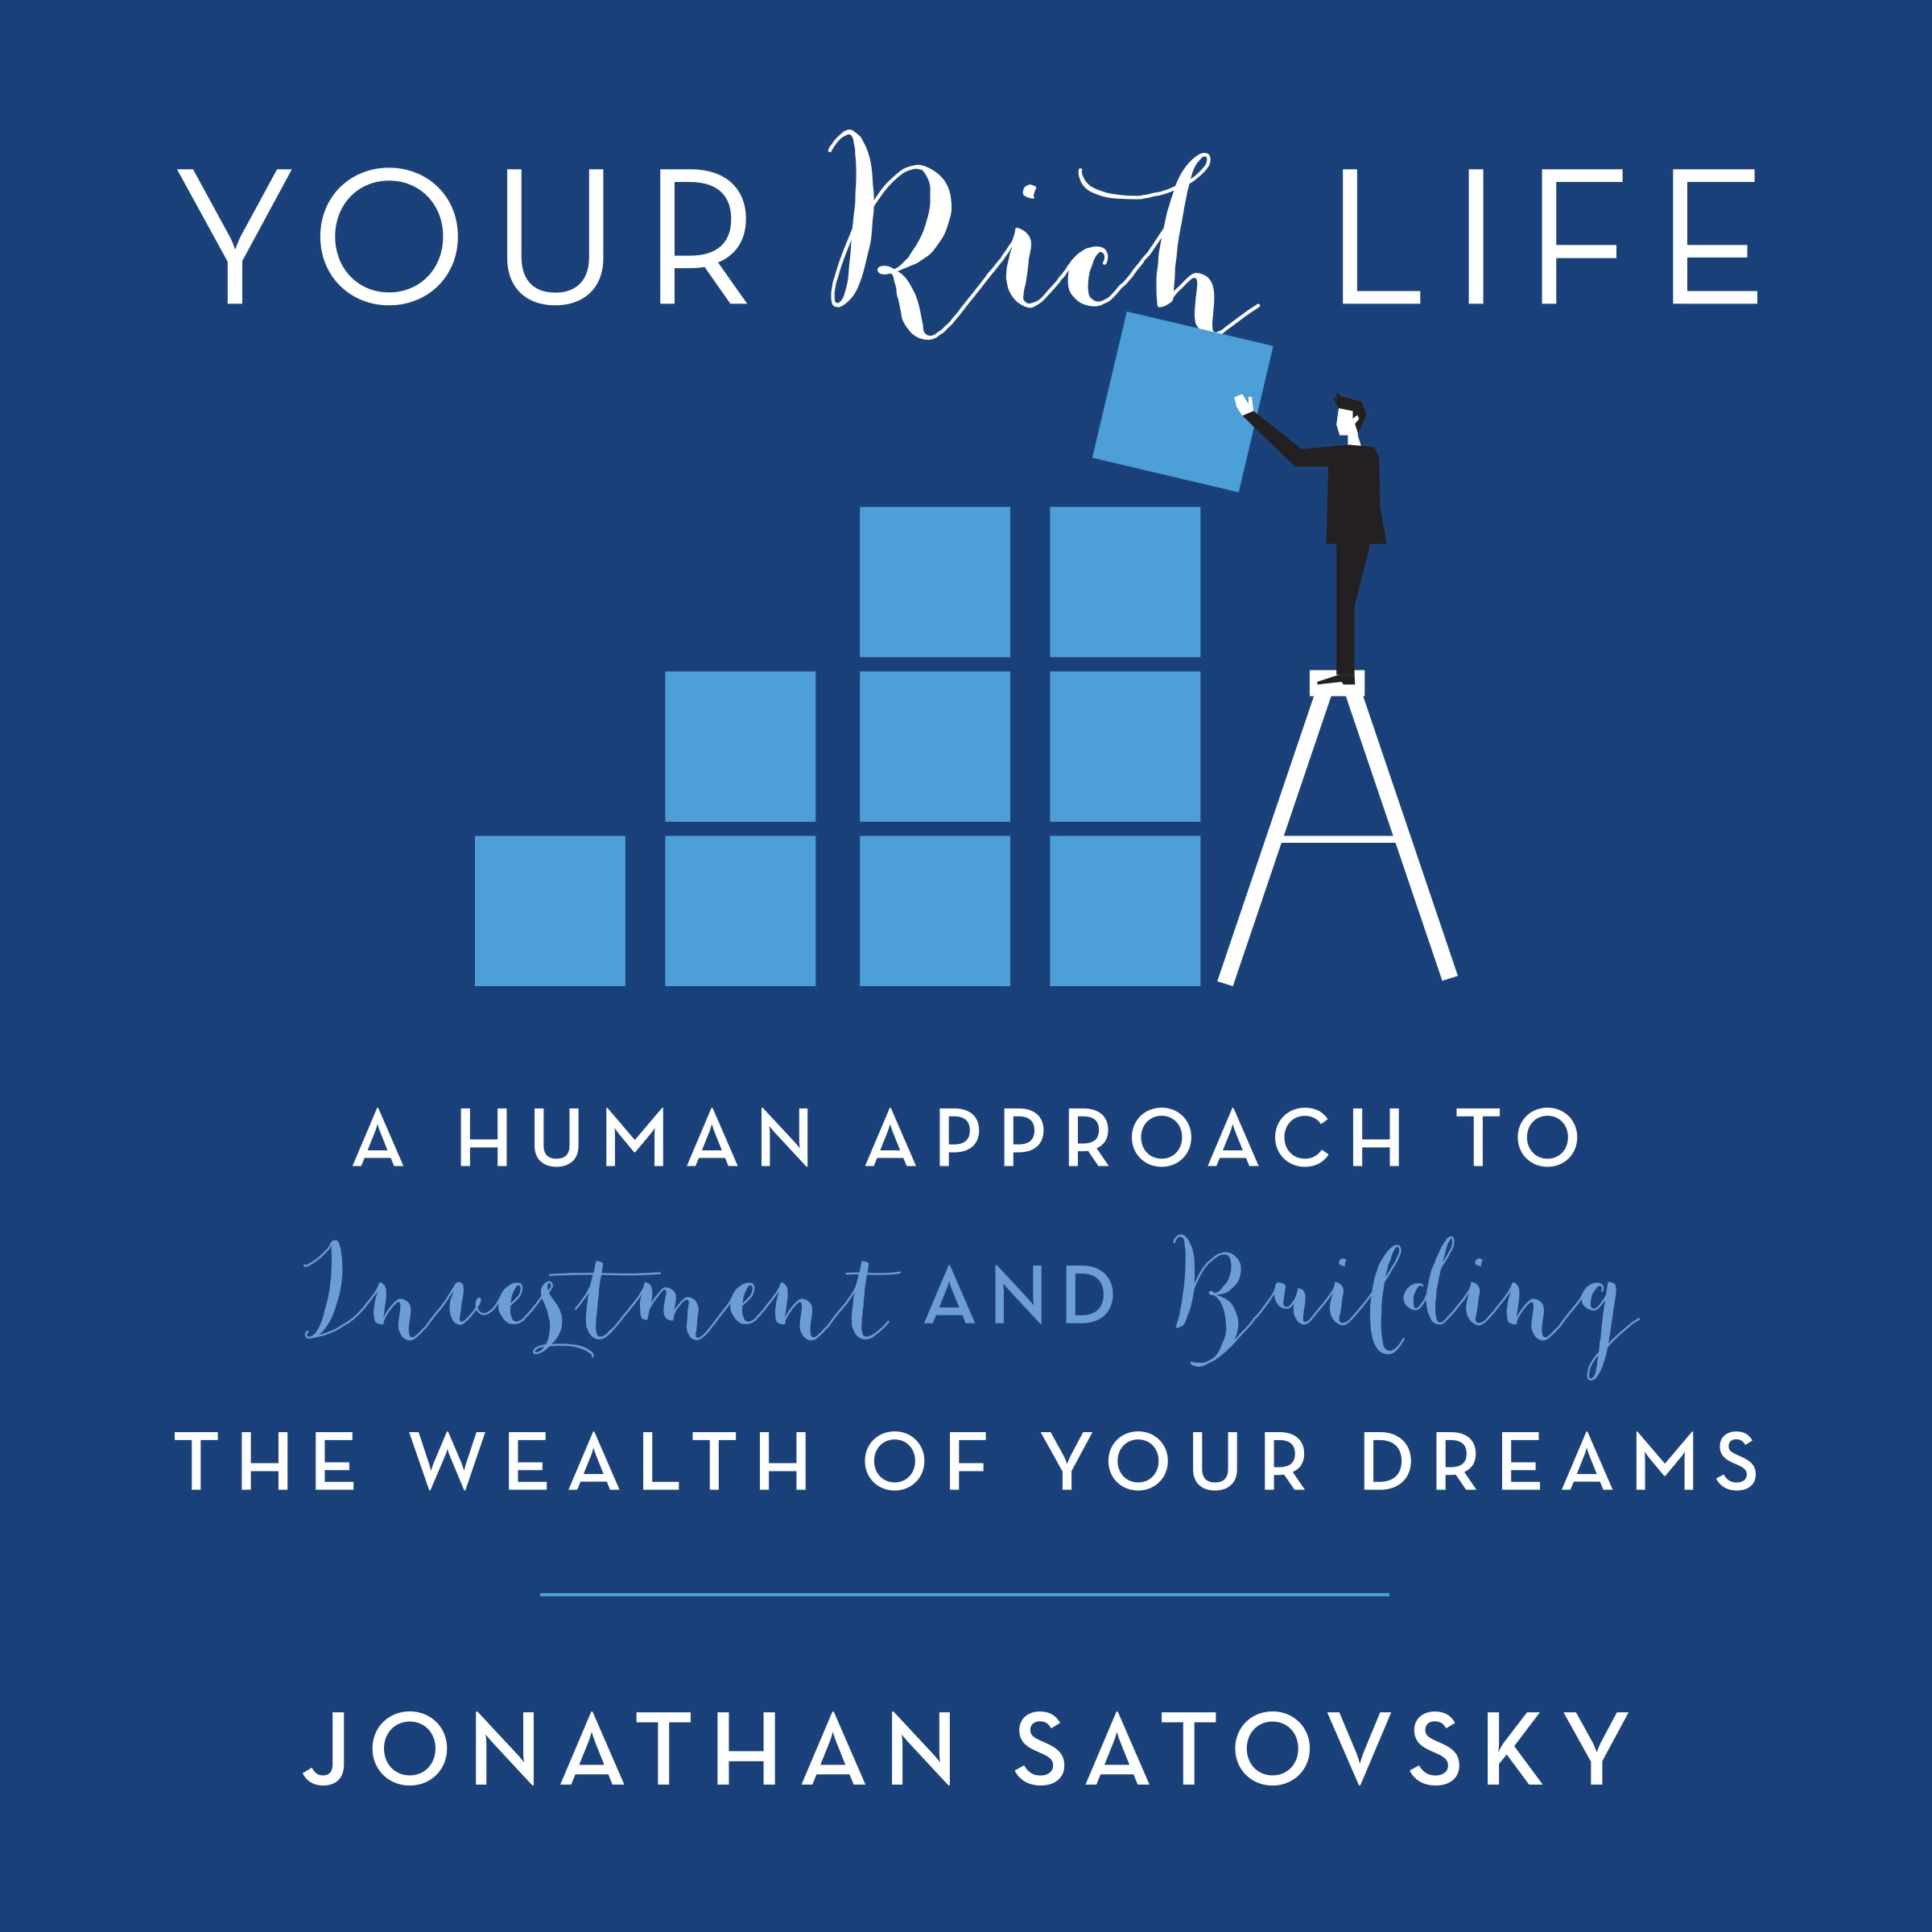 Your Rich Life by Jonathan Satovsky Audiobook